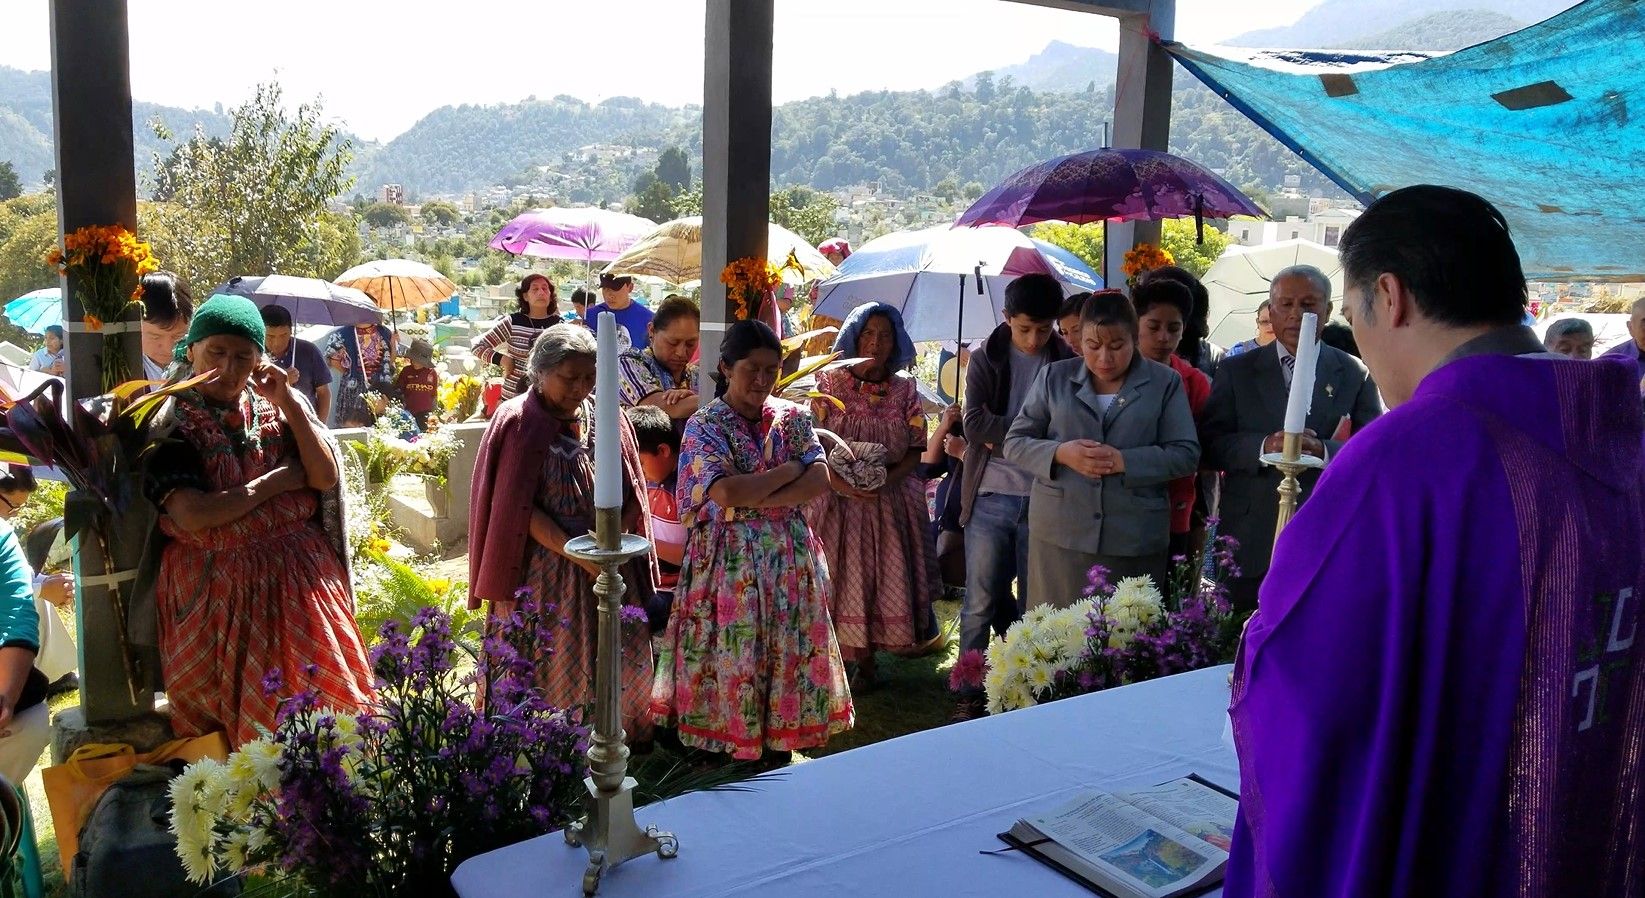 Every year on the morning of Nov. 2, a service is held on La Lomita, the highest point of the cemetery, hosted by El Calvario Catholic Church. Image by Kristian Hernandez. Guatemala, 2018.    